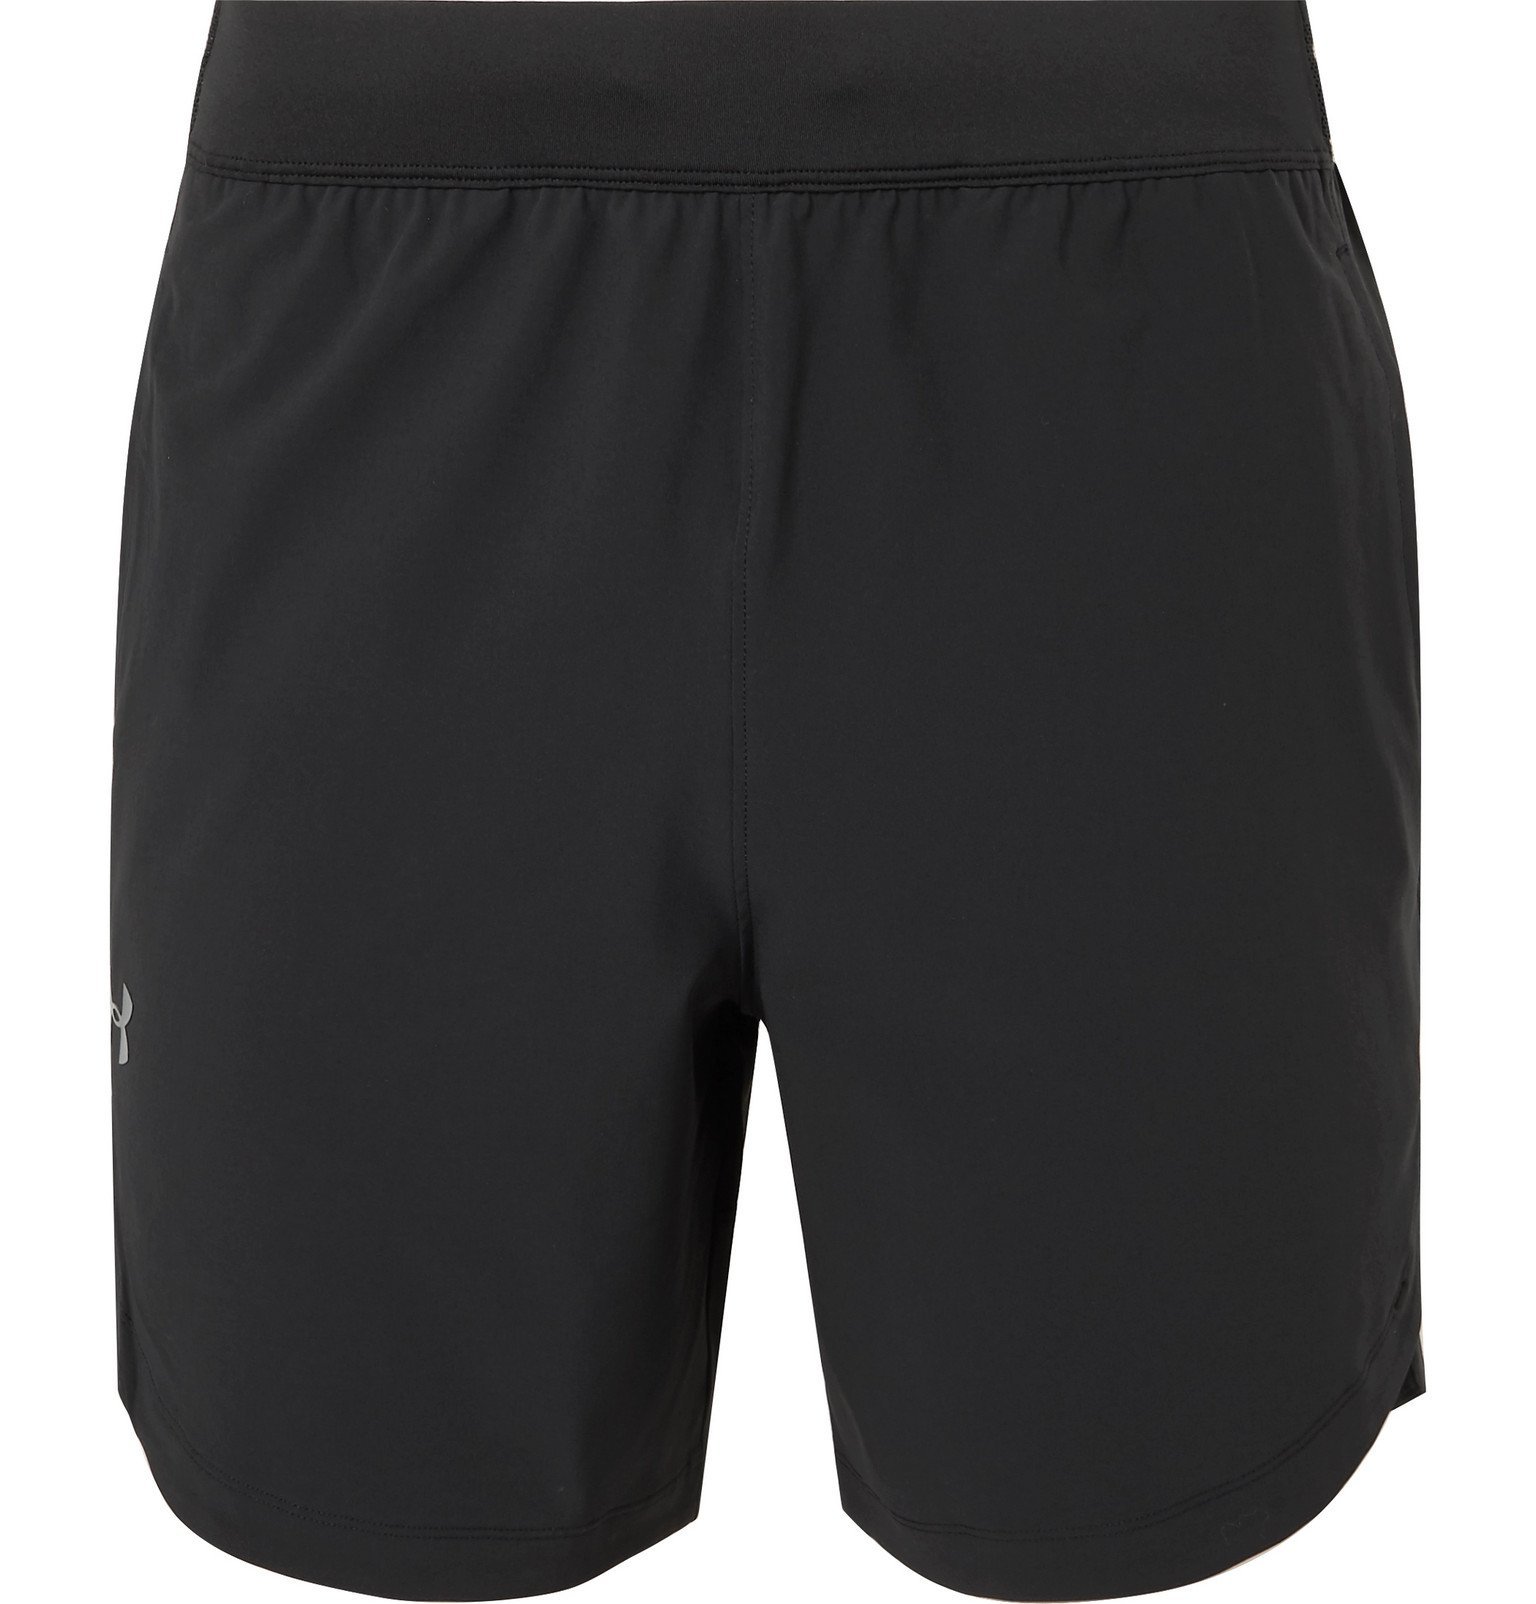 Under Armour - UA Mesh-Panelled Shell Shorts - Black Under Armour